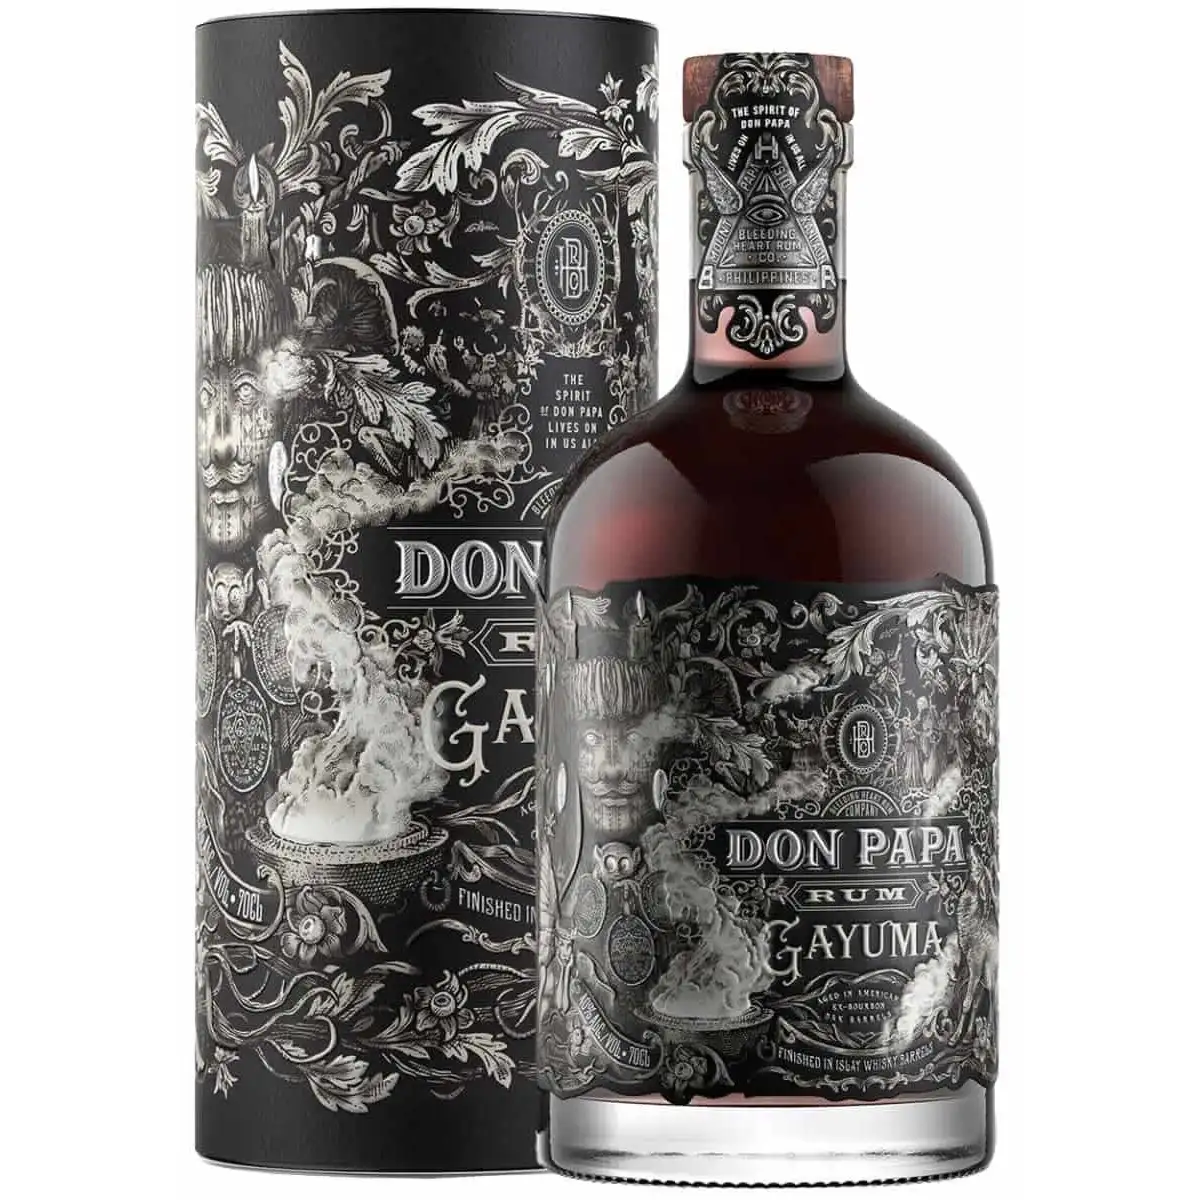 Image of the front of the bottle of the rum Don Papa Gayuma